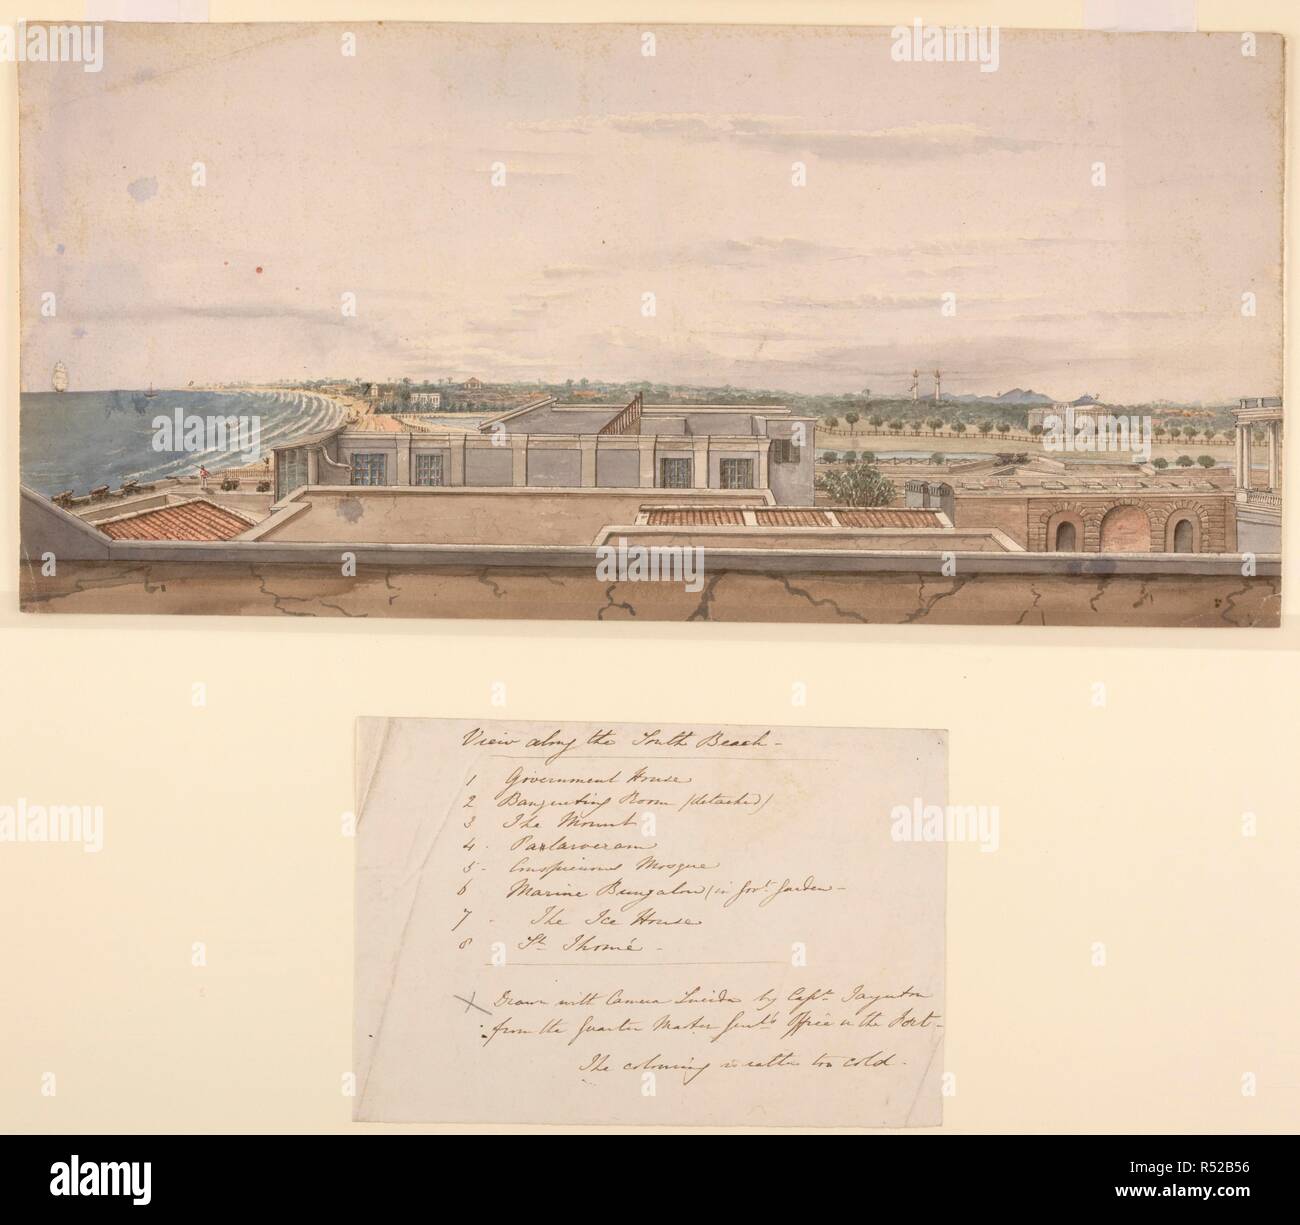 View of Madras looking south from the fort, with main landmarks numbered.  Inscribed on original label: â€˜View along the South Beach. 1. Government House. 2. Banqueting Room (detached) 3. The Mount. 4. Palaveram. 5. Conspicuous Mosque. 6. Marine Bungalow, in Govt Garden. 7. The Ice House. 8. St Thome. Drawn with Camera Lucida by Capt Taynton from the Quarter Master Genlâ€™s Office in the Fort. The colouring is rather too cold.â€™. c.1838. Water-colour 16.6 by 35.3cm. Source: WD 3738. Author: Taynton, Edwin George. Stock Photo